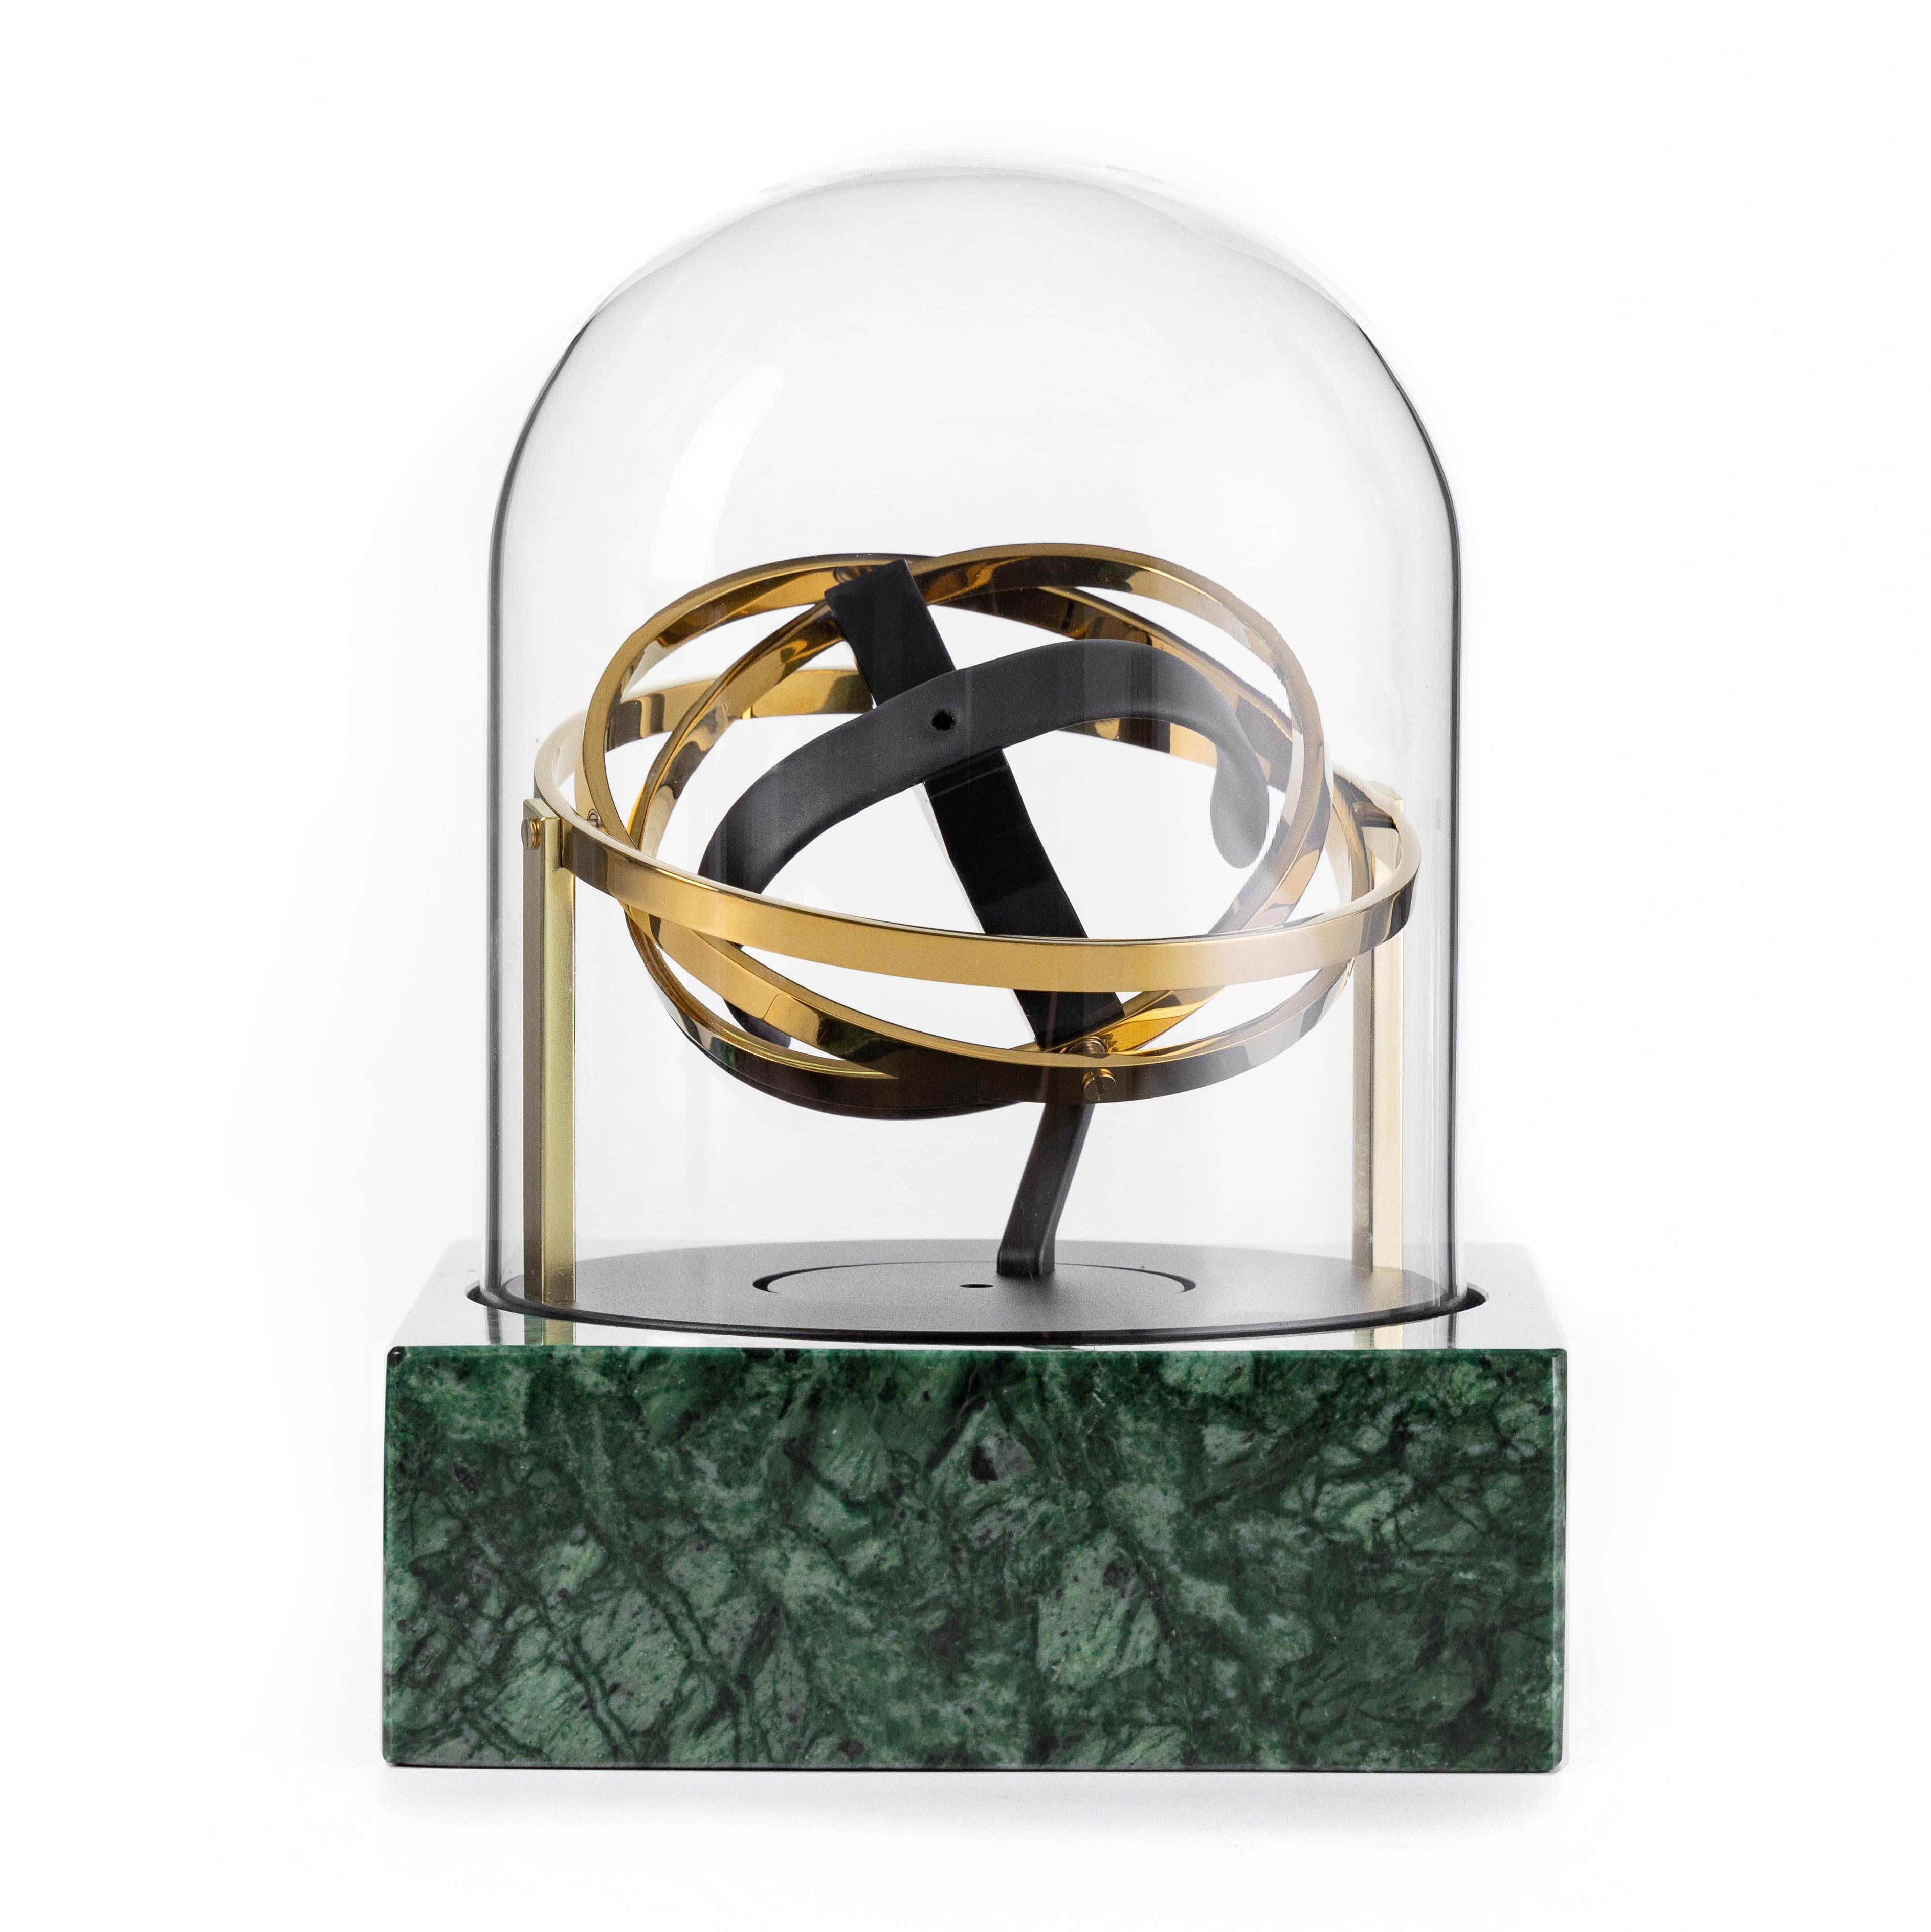 Single Watch Winder - Astronomia X1 Silver - Green Marble Edition